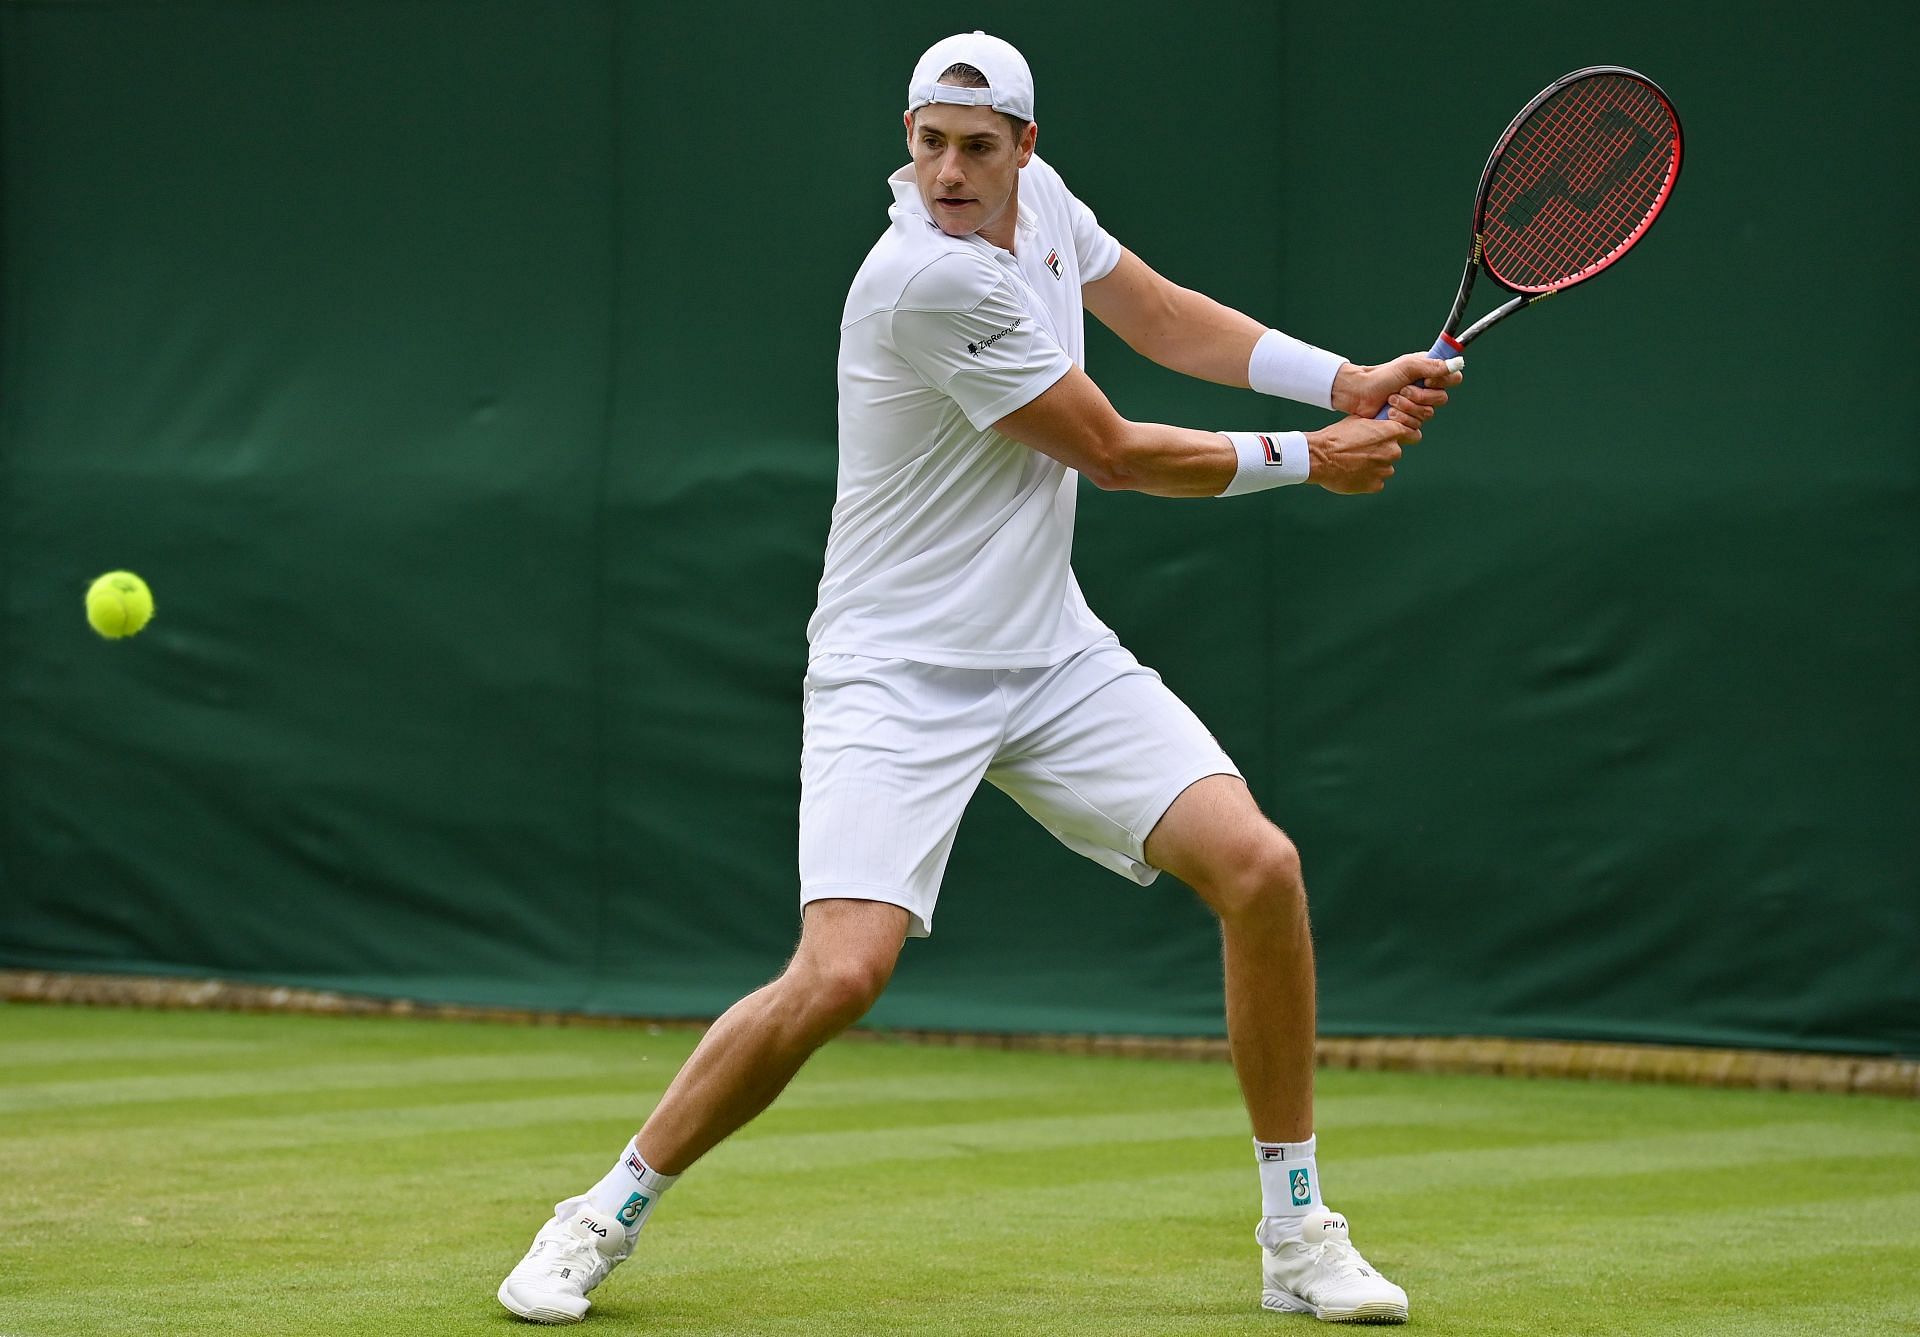 John Isner will be in action on Day 3 of WImbledon